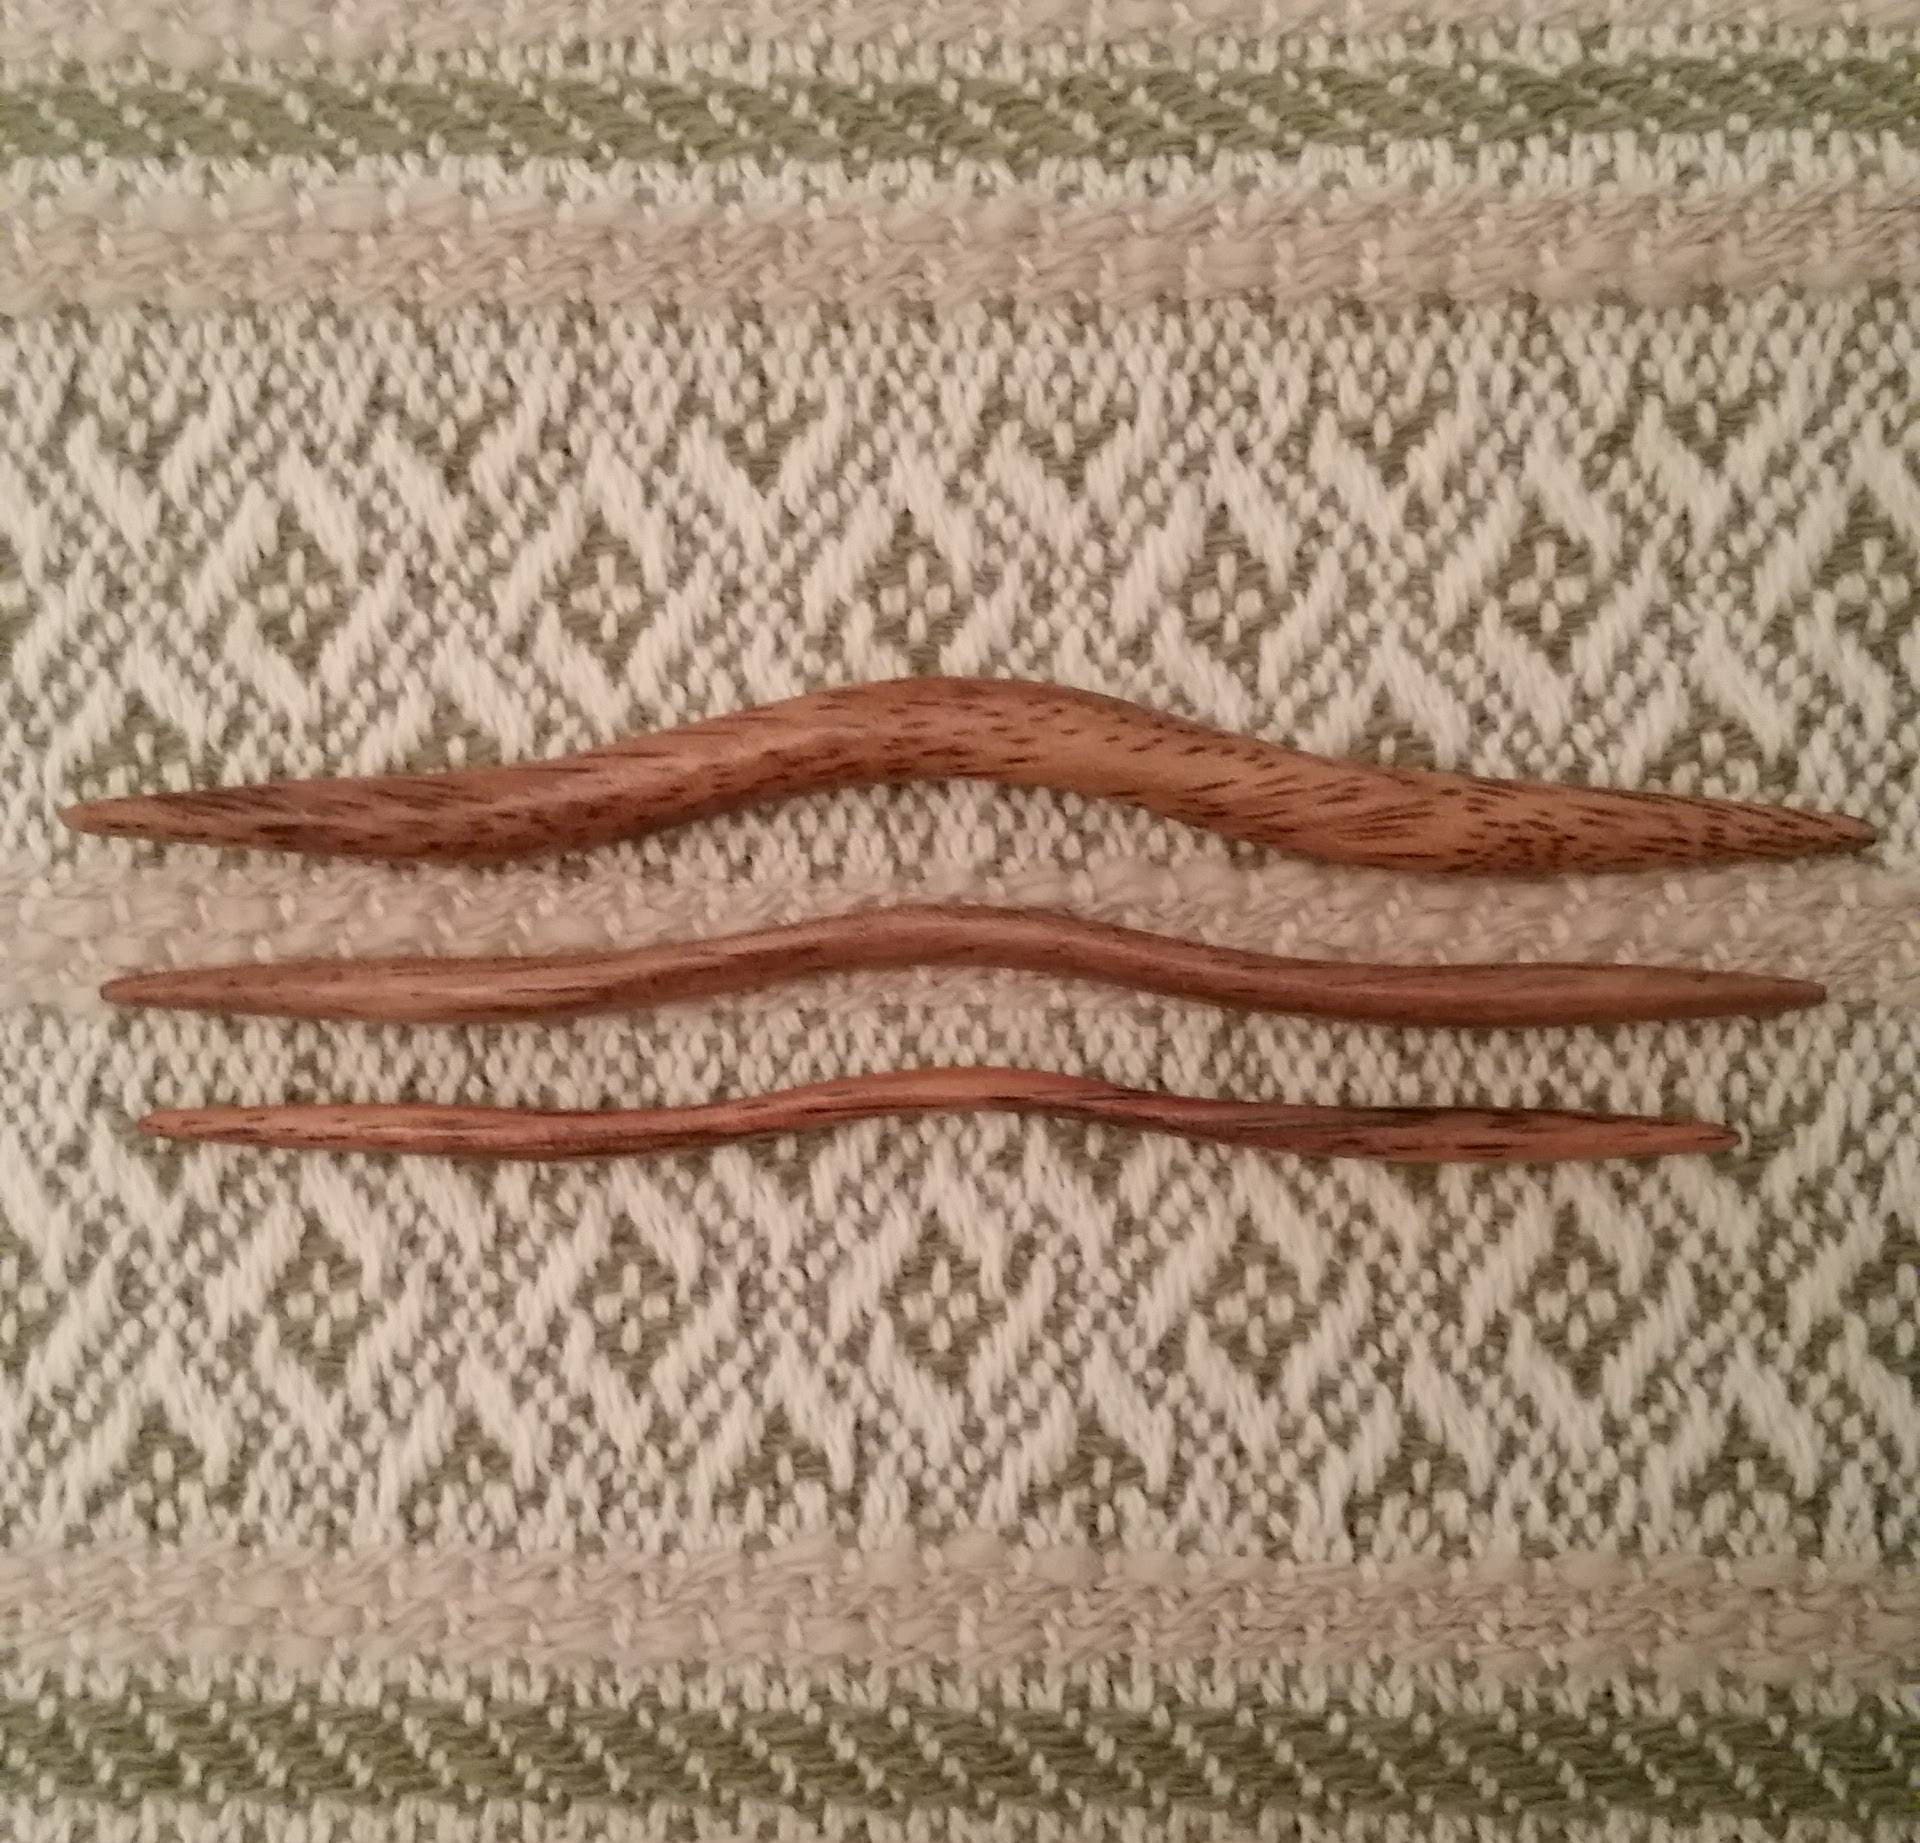 Brittany wood cable needles for knitting cables